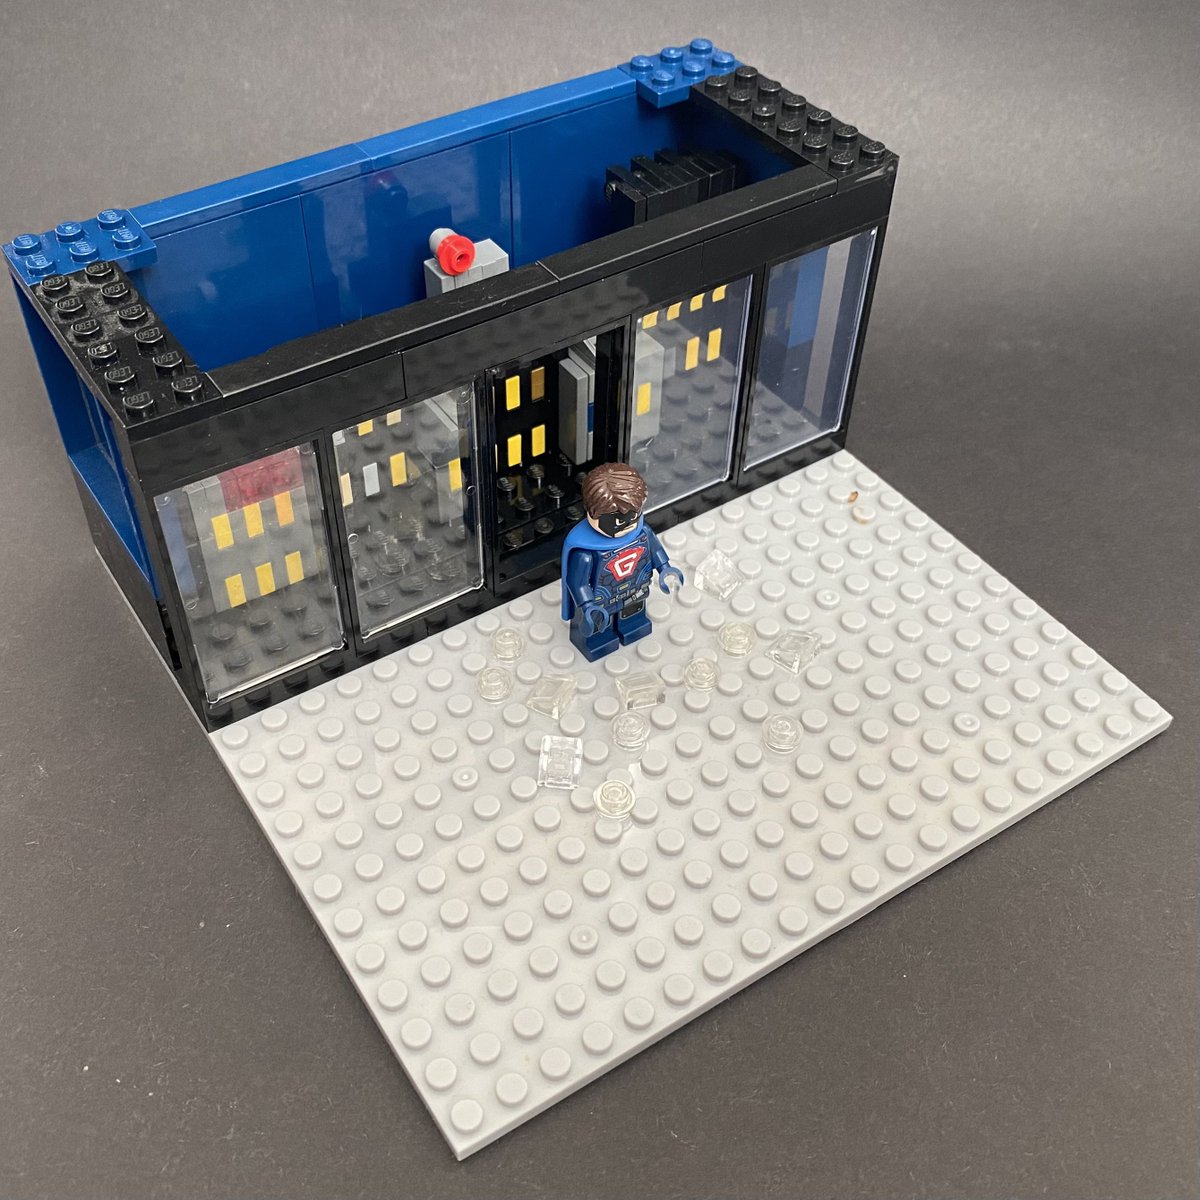 Impressive. Those windows are built to withstand a blast equivalent to four nuclear explosions. 

The Ghost smashes it on #12thDoctor #DoctorWho special The Return of Doctor Mysterio.

#legodoctorwho #LEGO